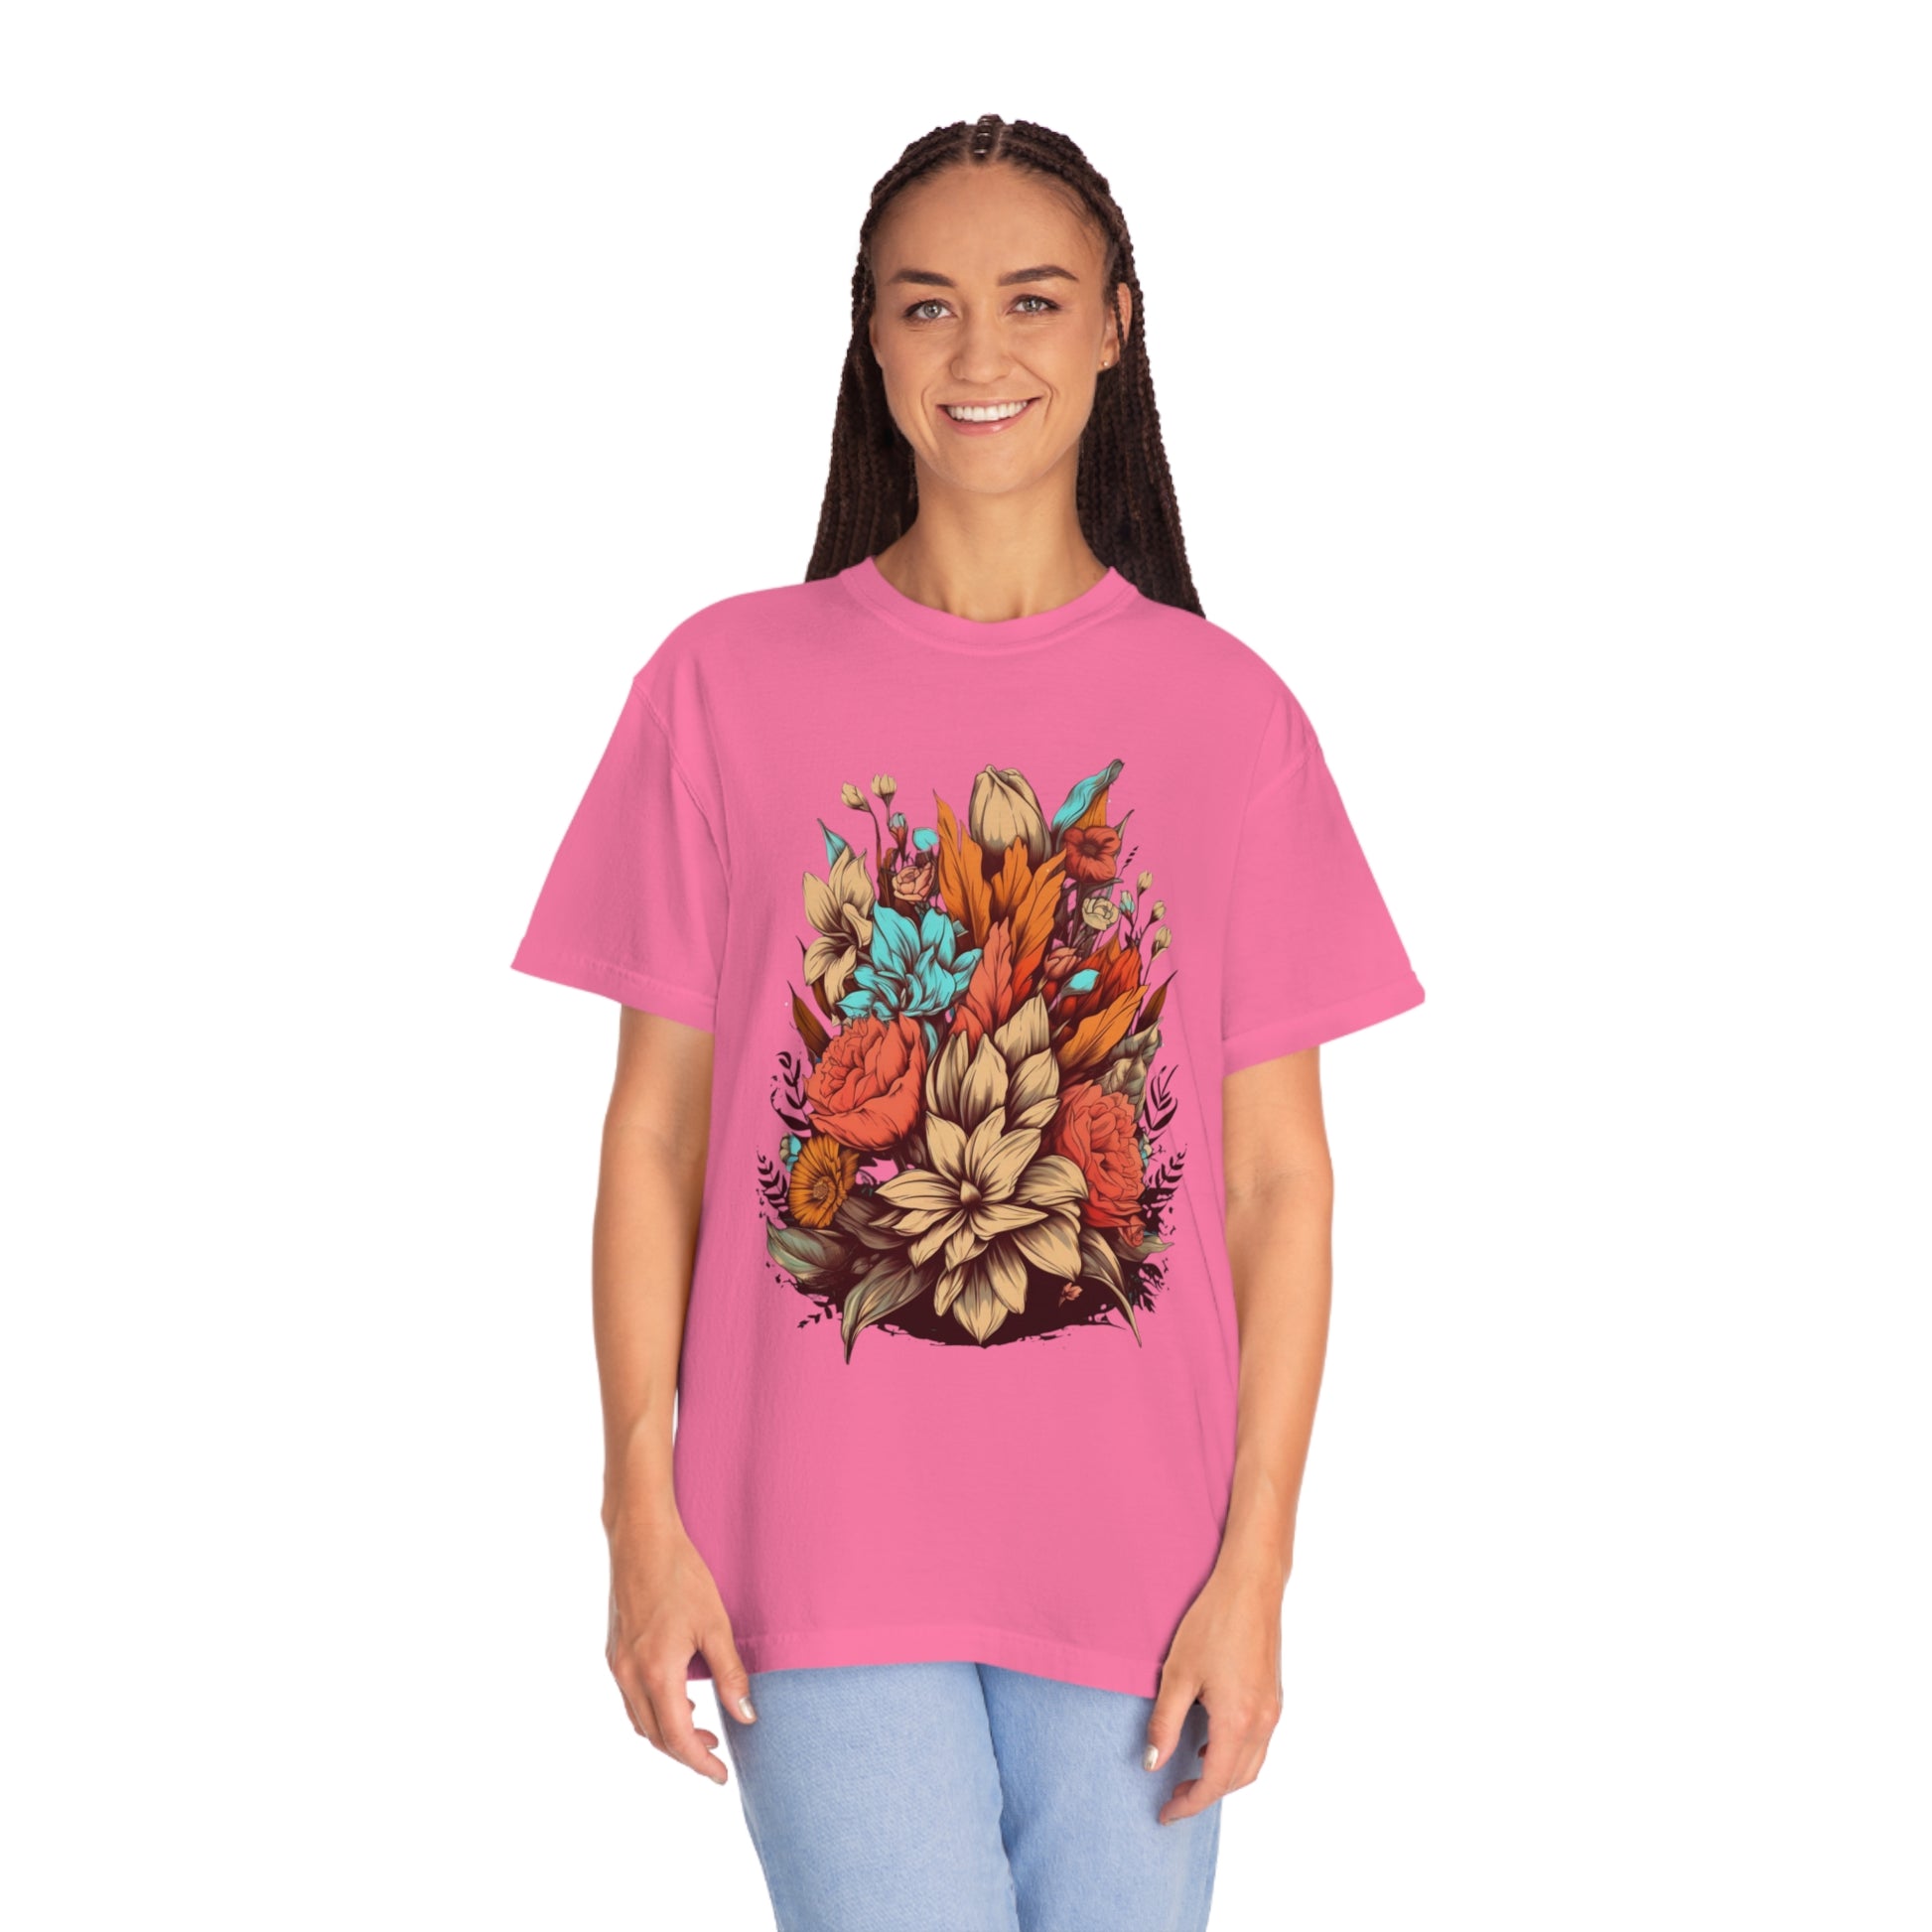 Boho Wildflowers Floral Nature Shirt | Garment Dyed Boho Tee for Nature Lovers T-Shirt Crunchberry S 